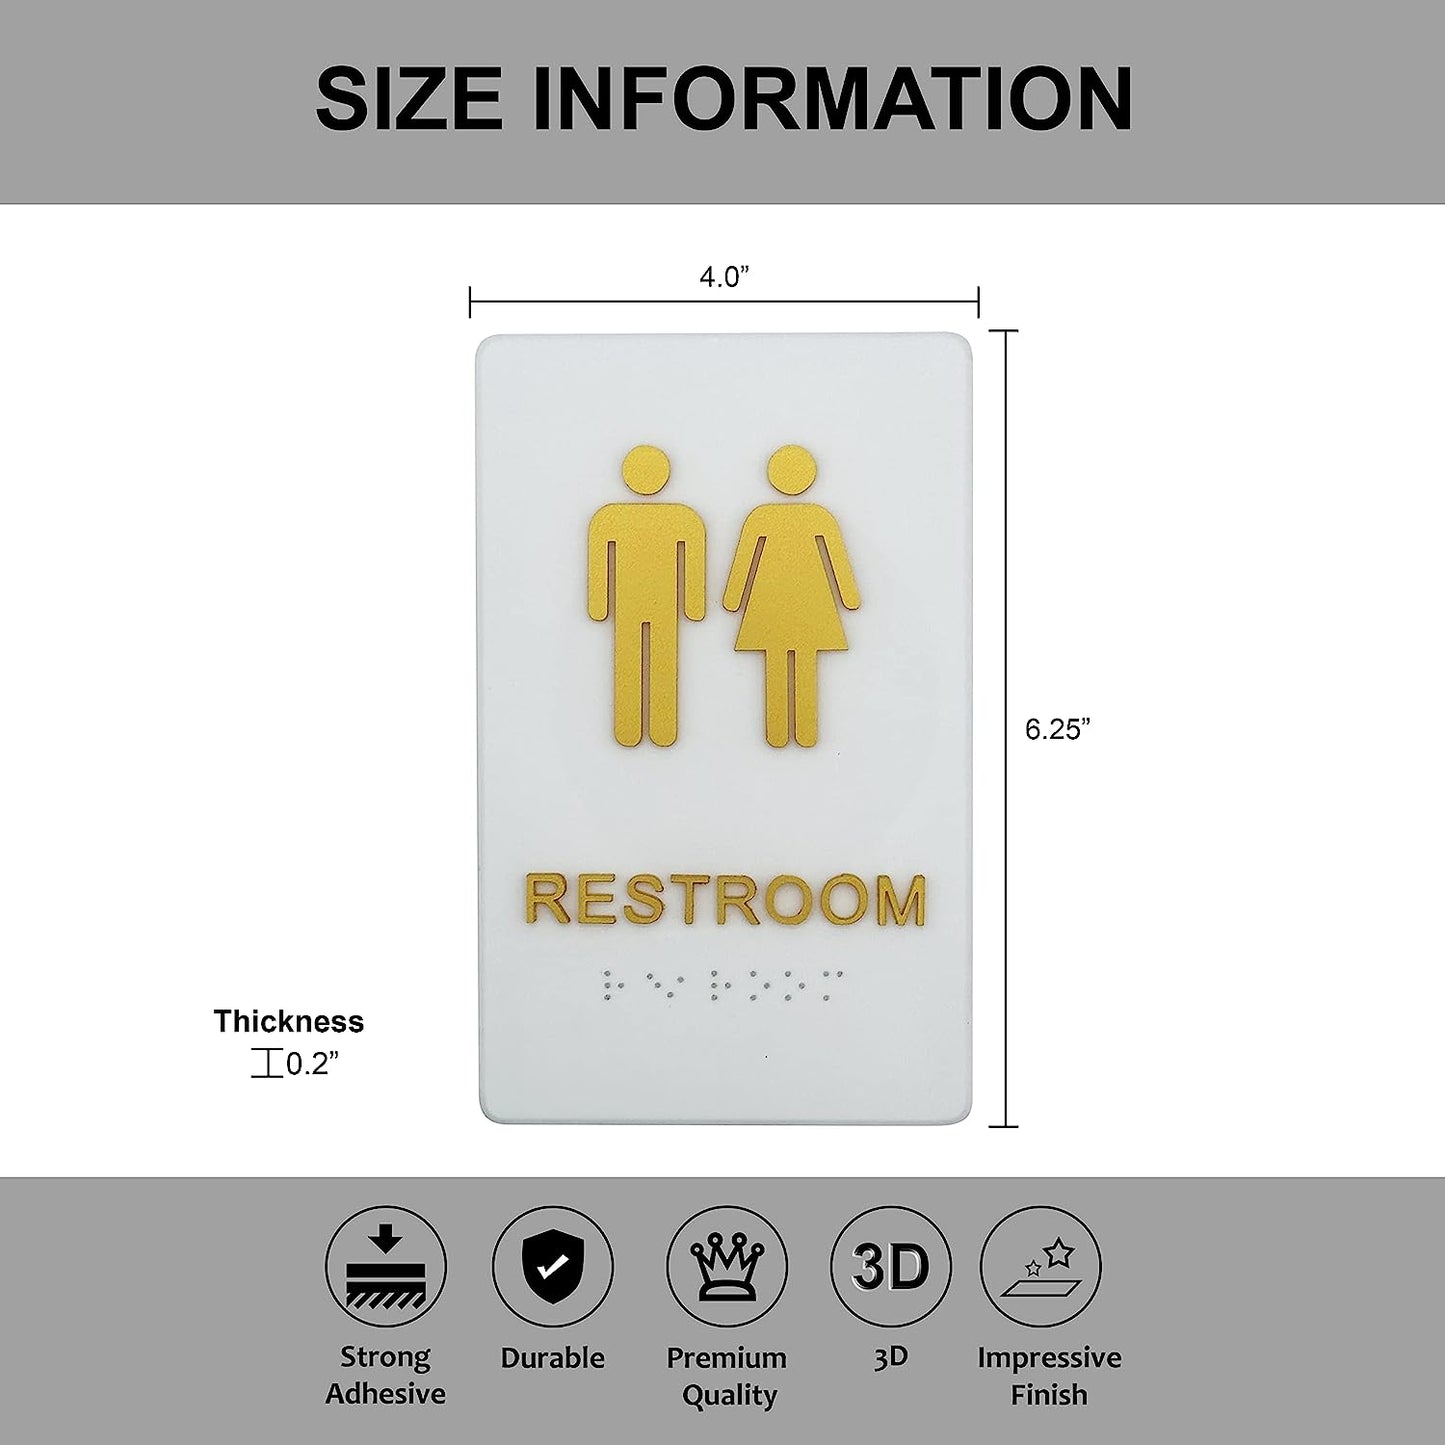 Acrylic 3D Gold Finish Restroom Sign with Braille